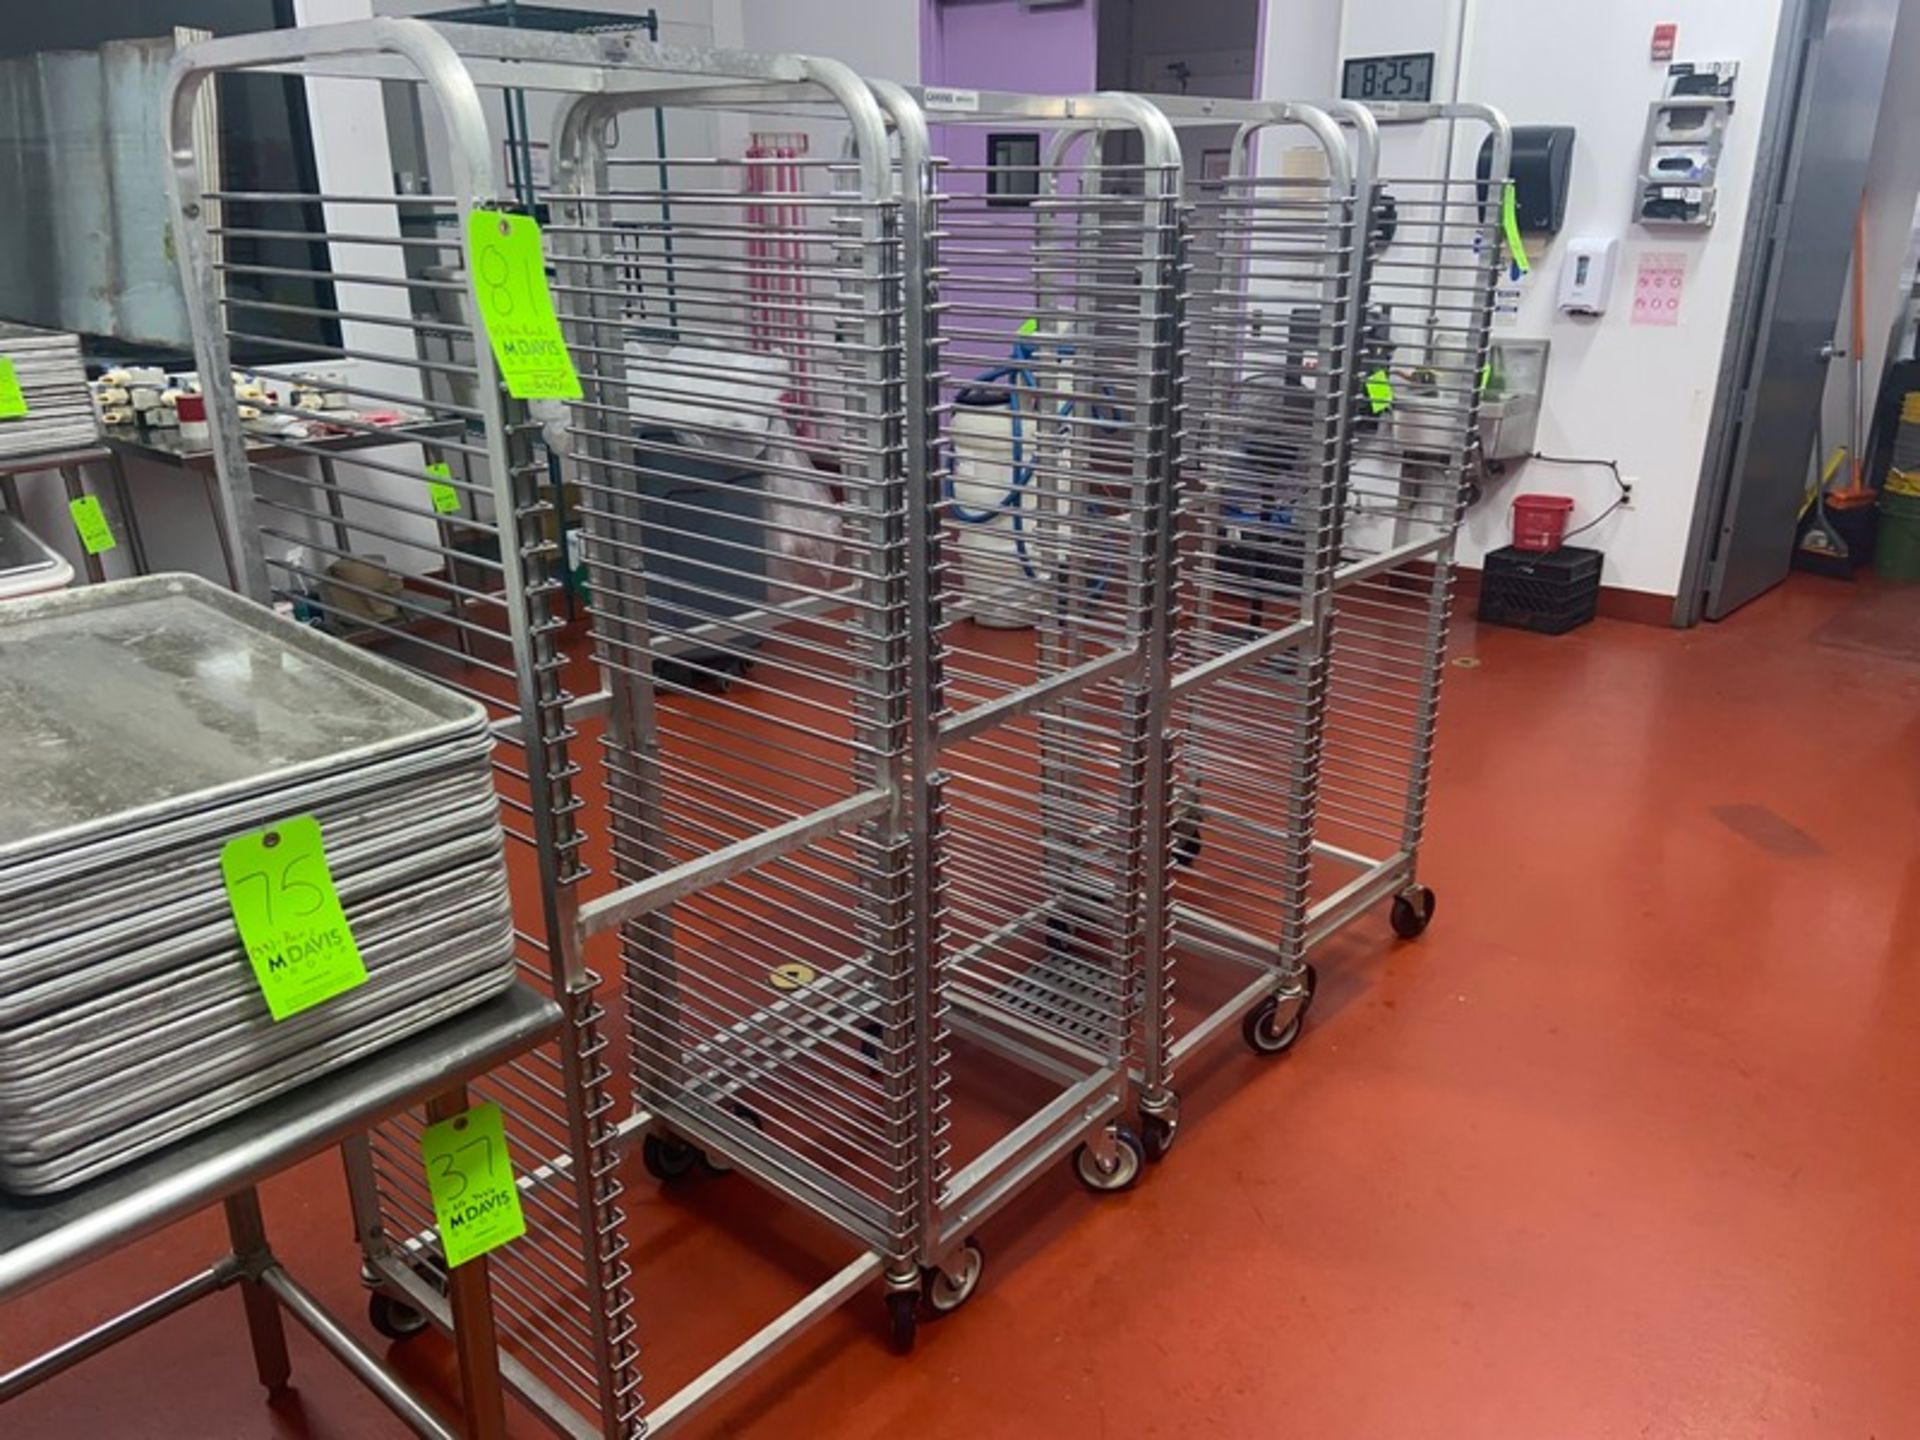 (4) Channel Baking Pan Racks, with (36) Pan Slots, Overall Dims.: Aprox. 25" L x 20-1/2" W x 70" - Bild 2 aus 3